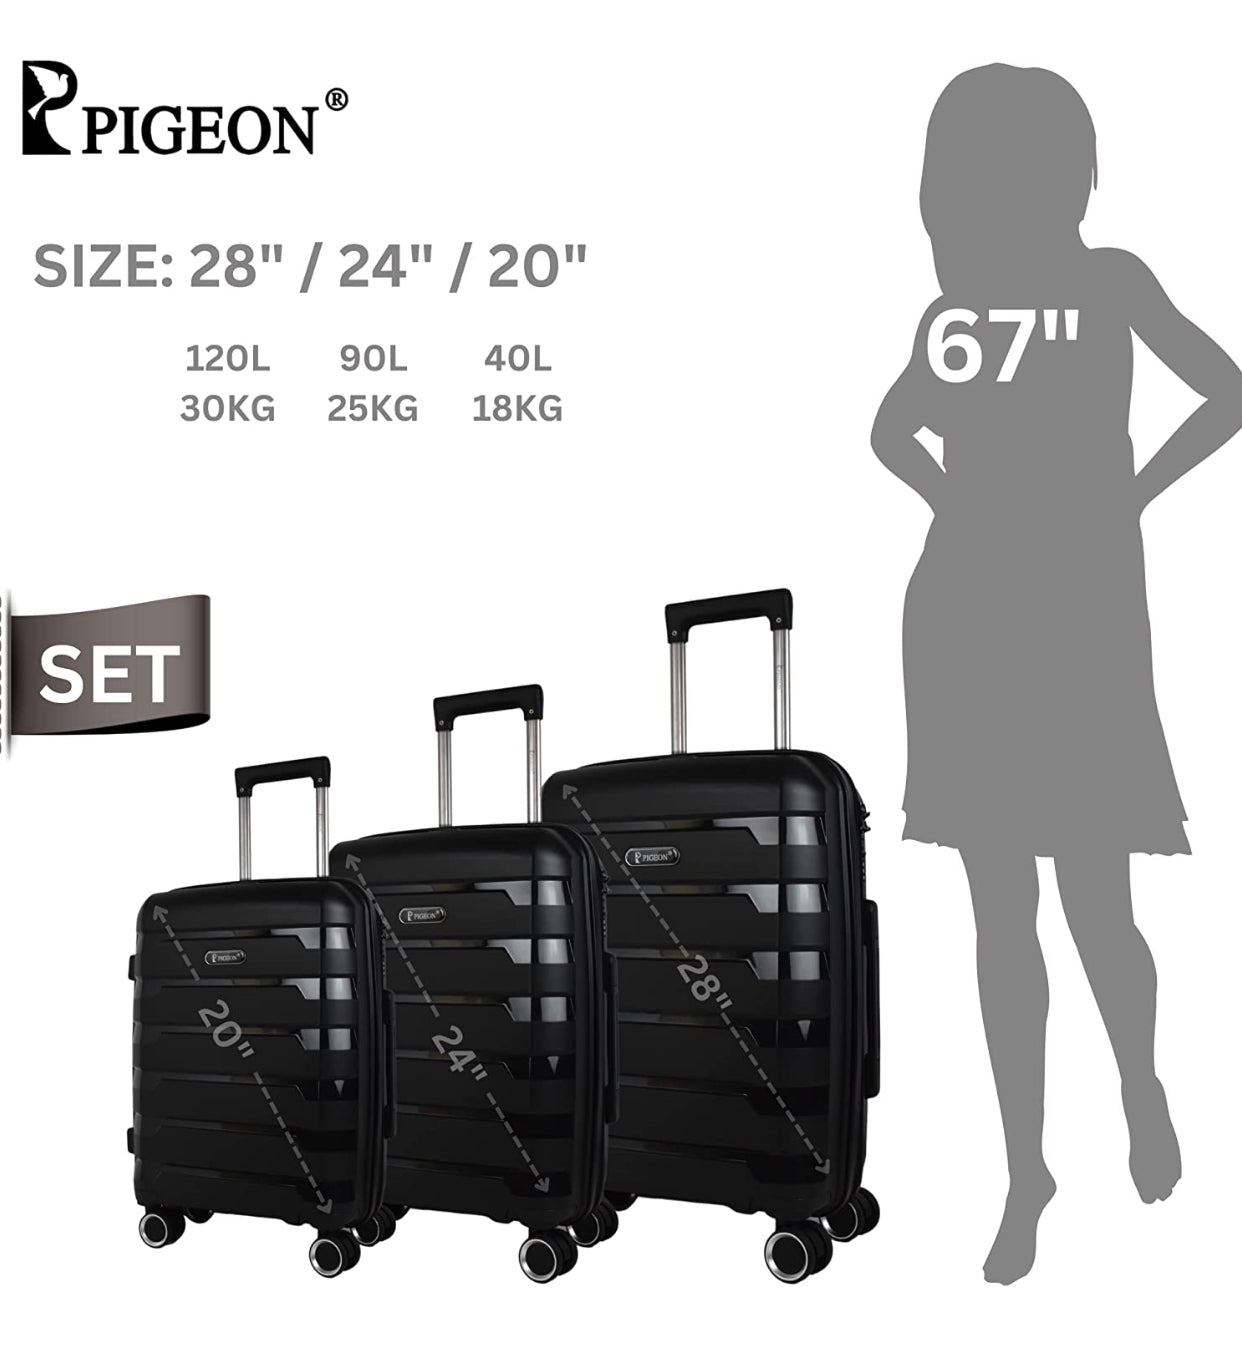 PIGEON New black Luggage 20/24/28 Inch PP with protector